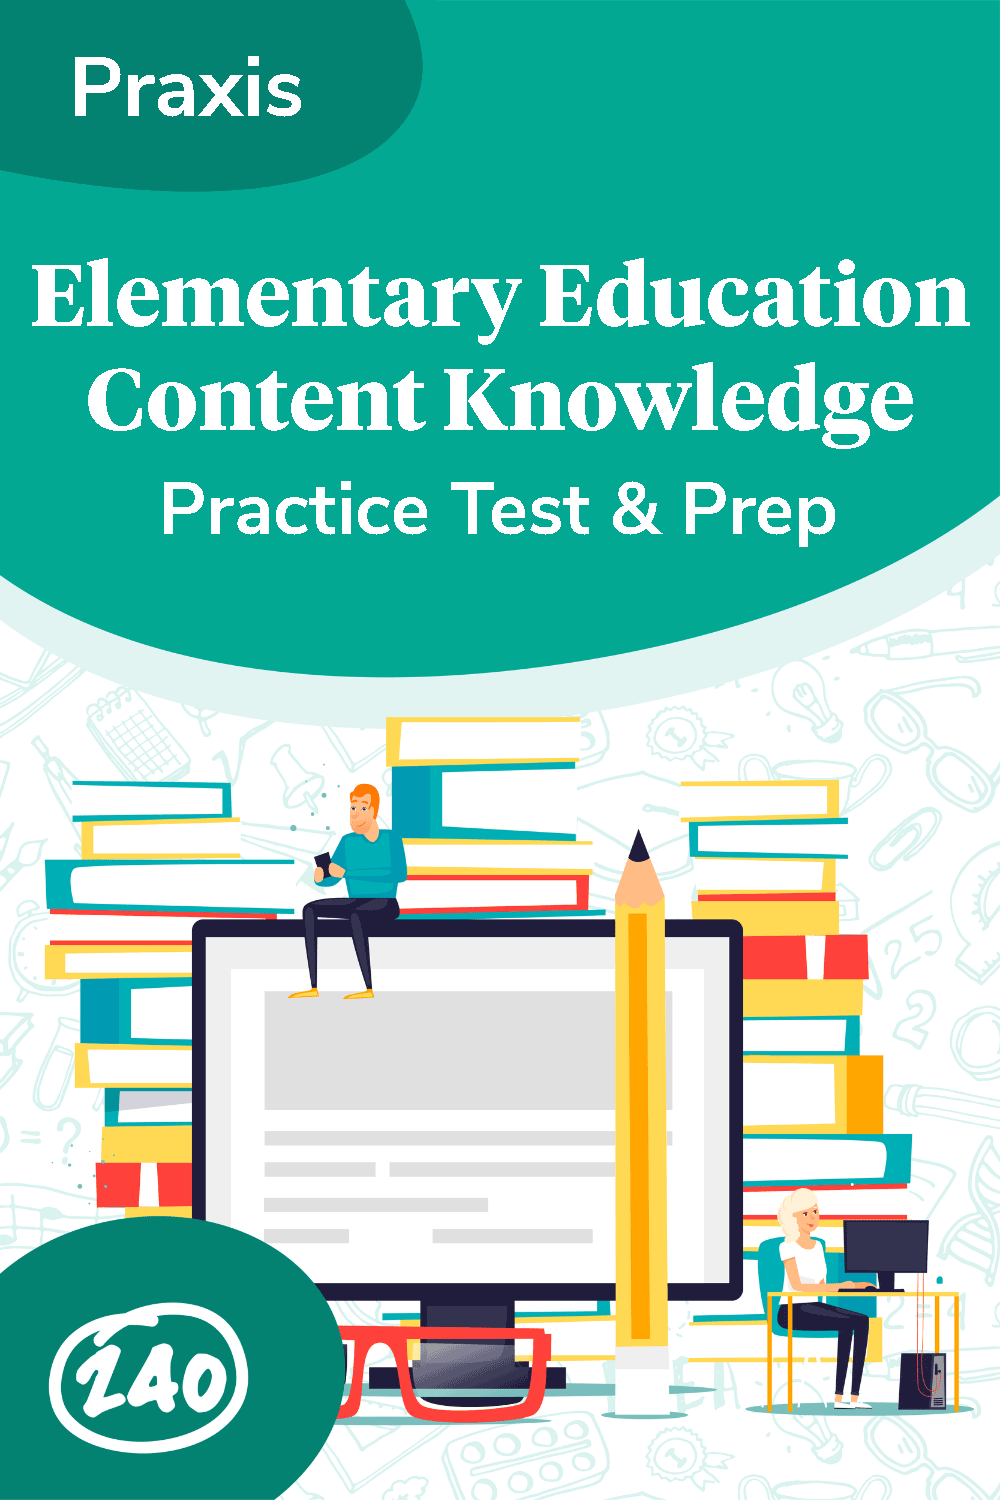 Praxis Elementary Education Content Knowledge